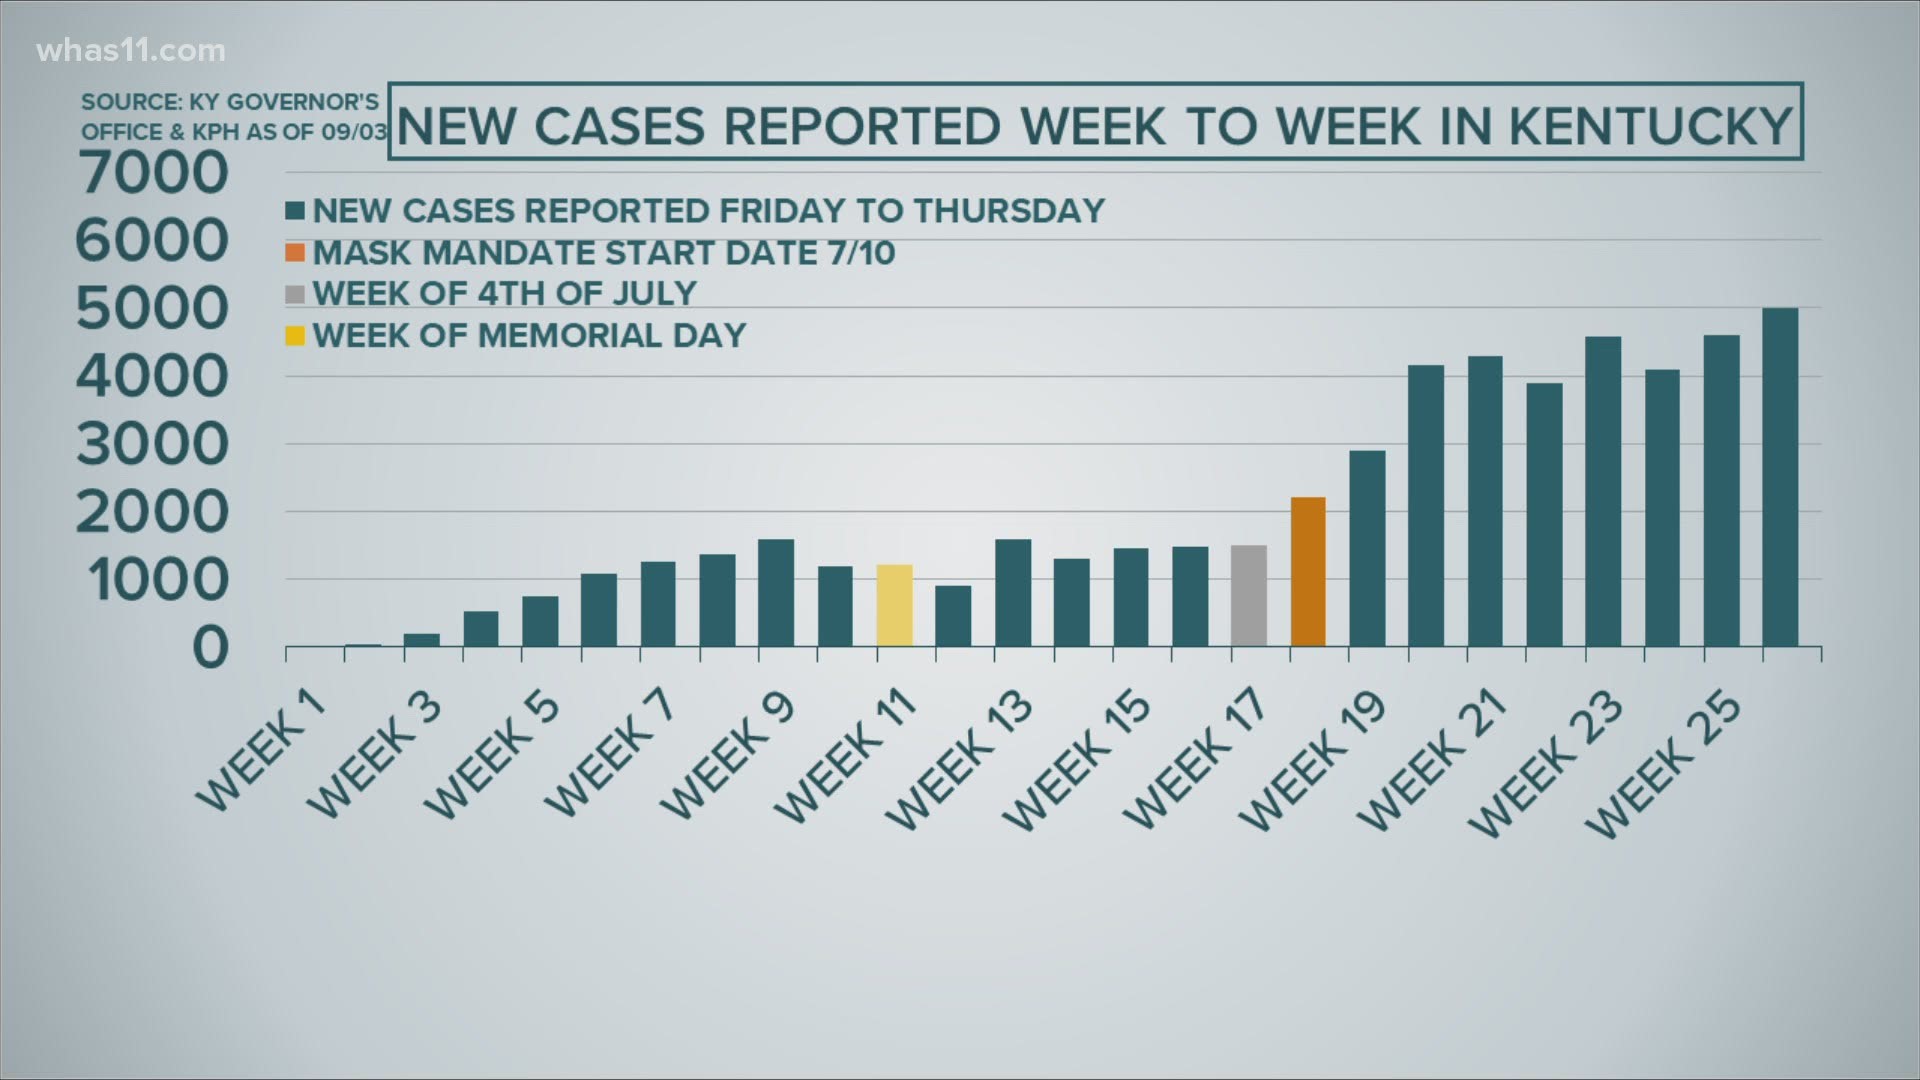 This week, Kentucky had the most newly cases reported to date with 4,989 cases.